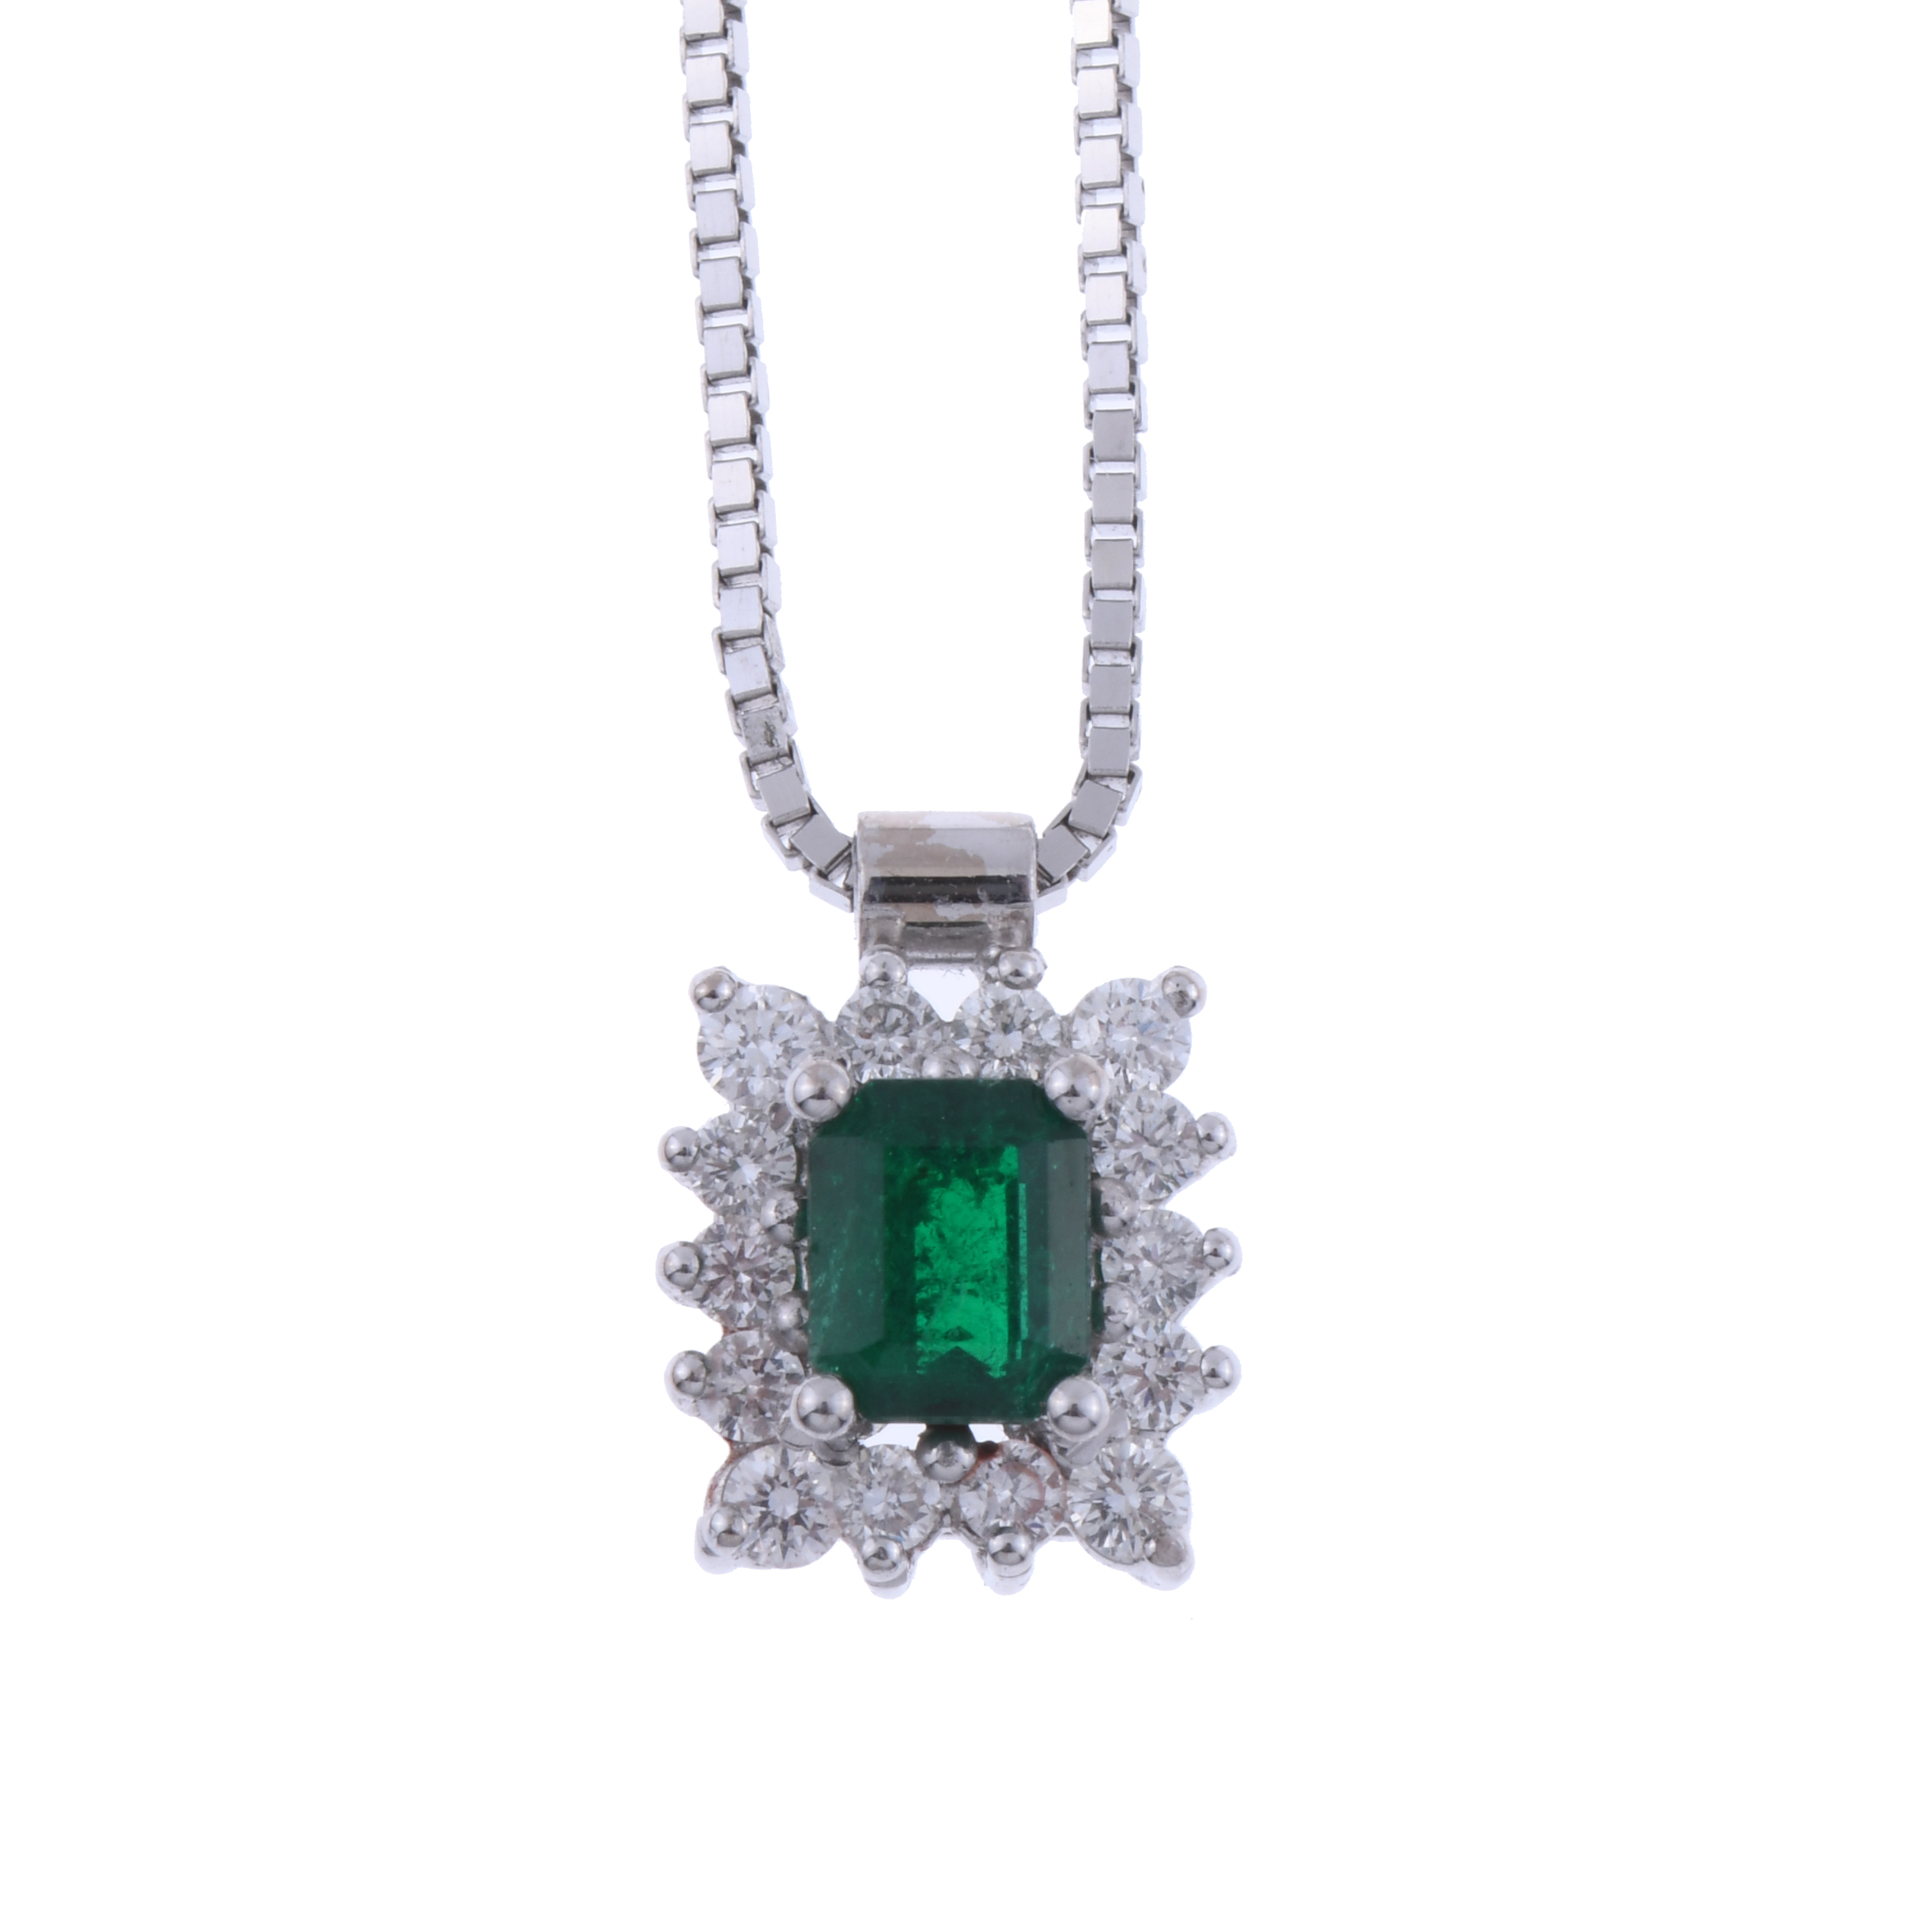 PENDANT WITH DIAMONDS AND EMERALD.